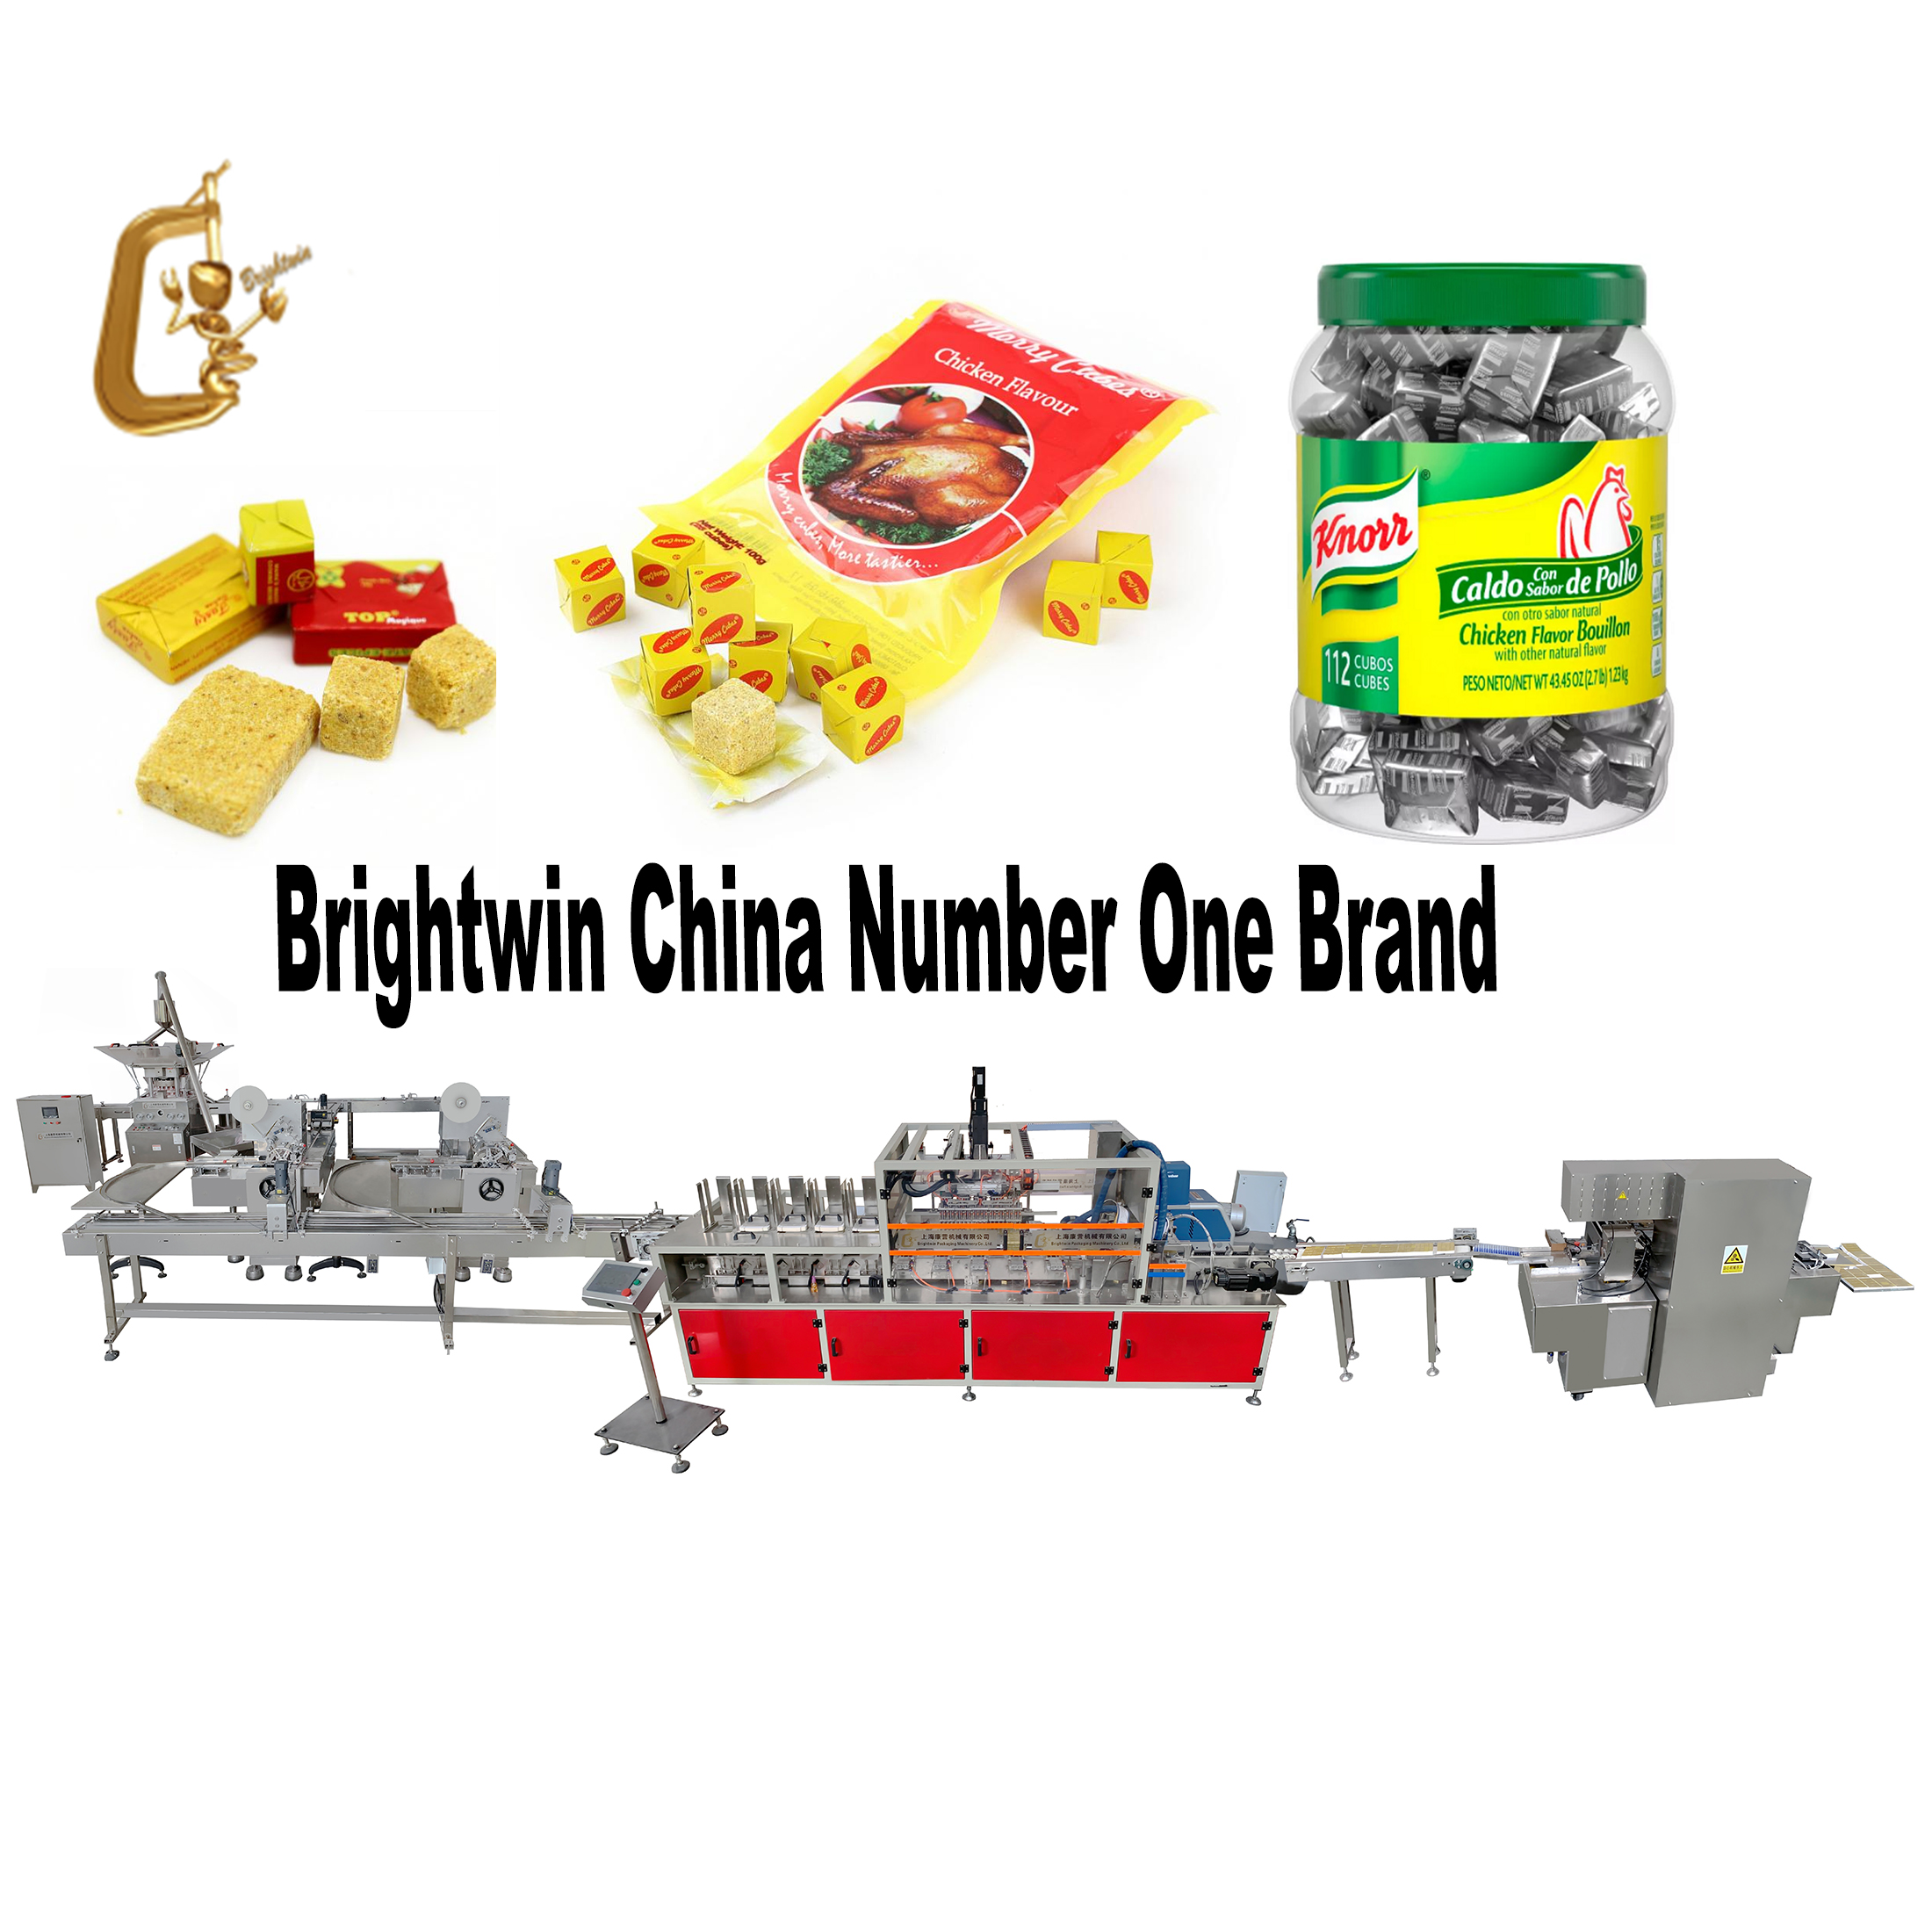 HALAL SOFT CHICKEN STOCK CUBE BOUILLON CUBE CUBE Manufacturing equipment making packing machine Featured Image